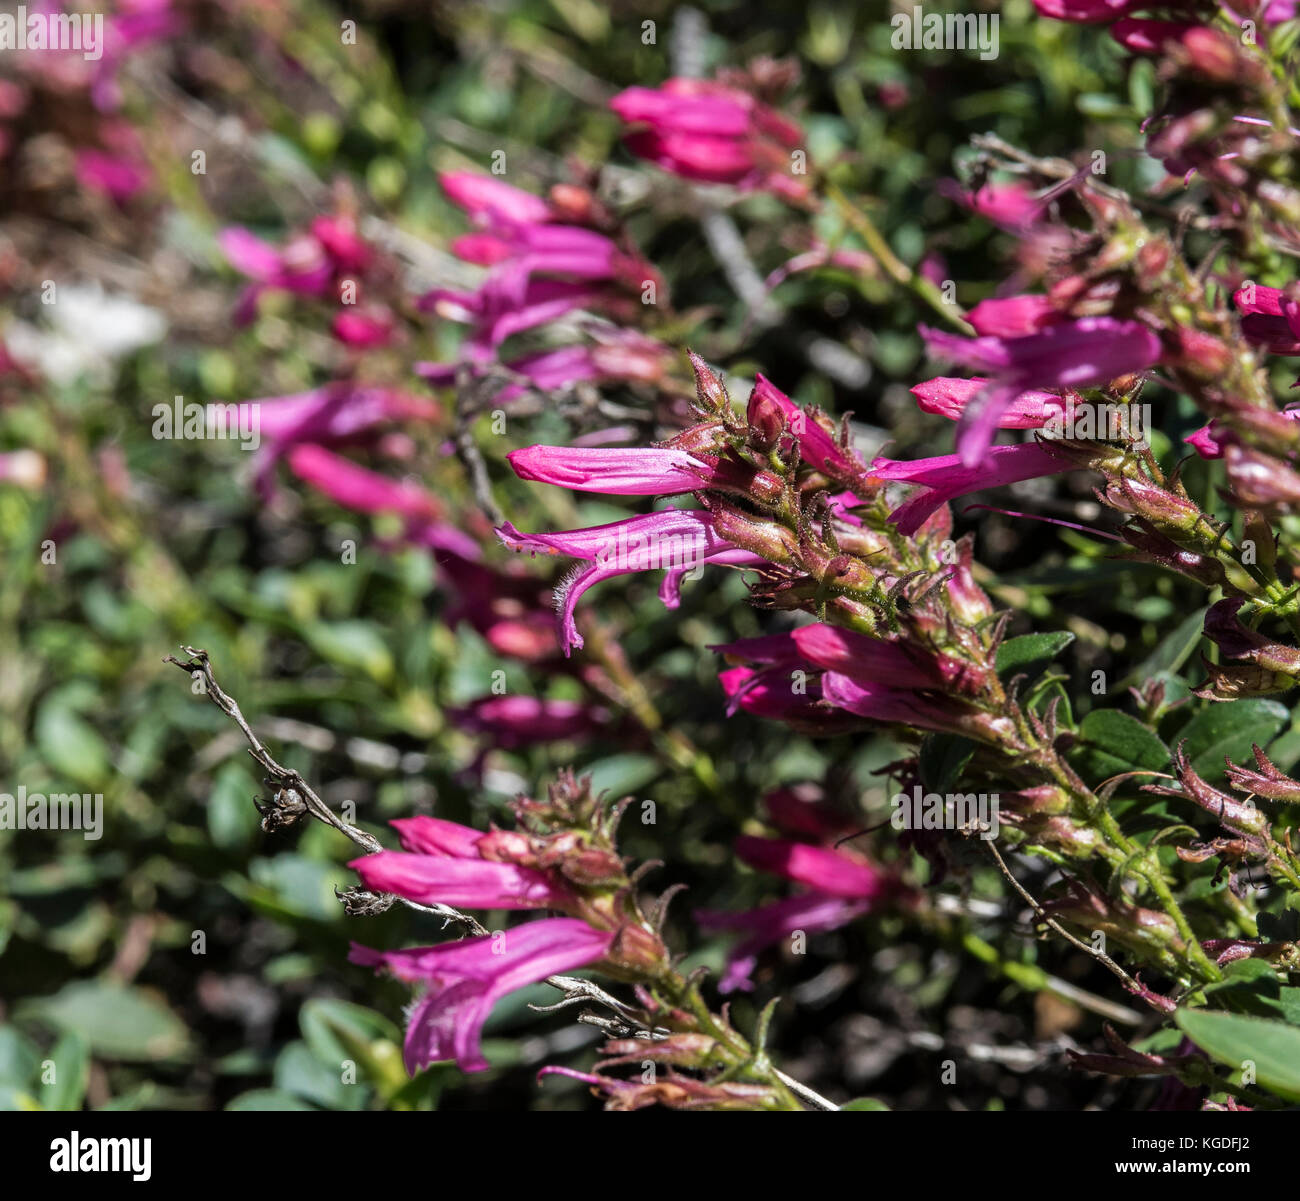 Beautiful Pride of the Mountains wild flowers in Yosemite National Park. Stock Photo